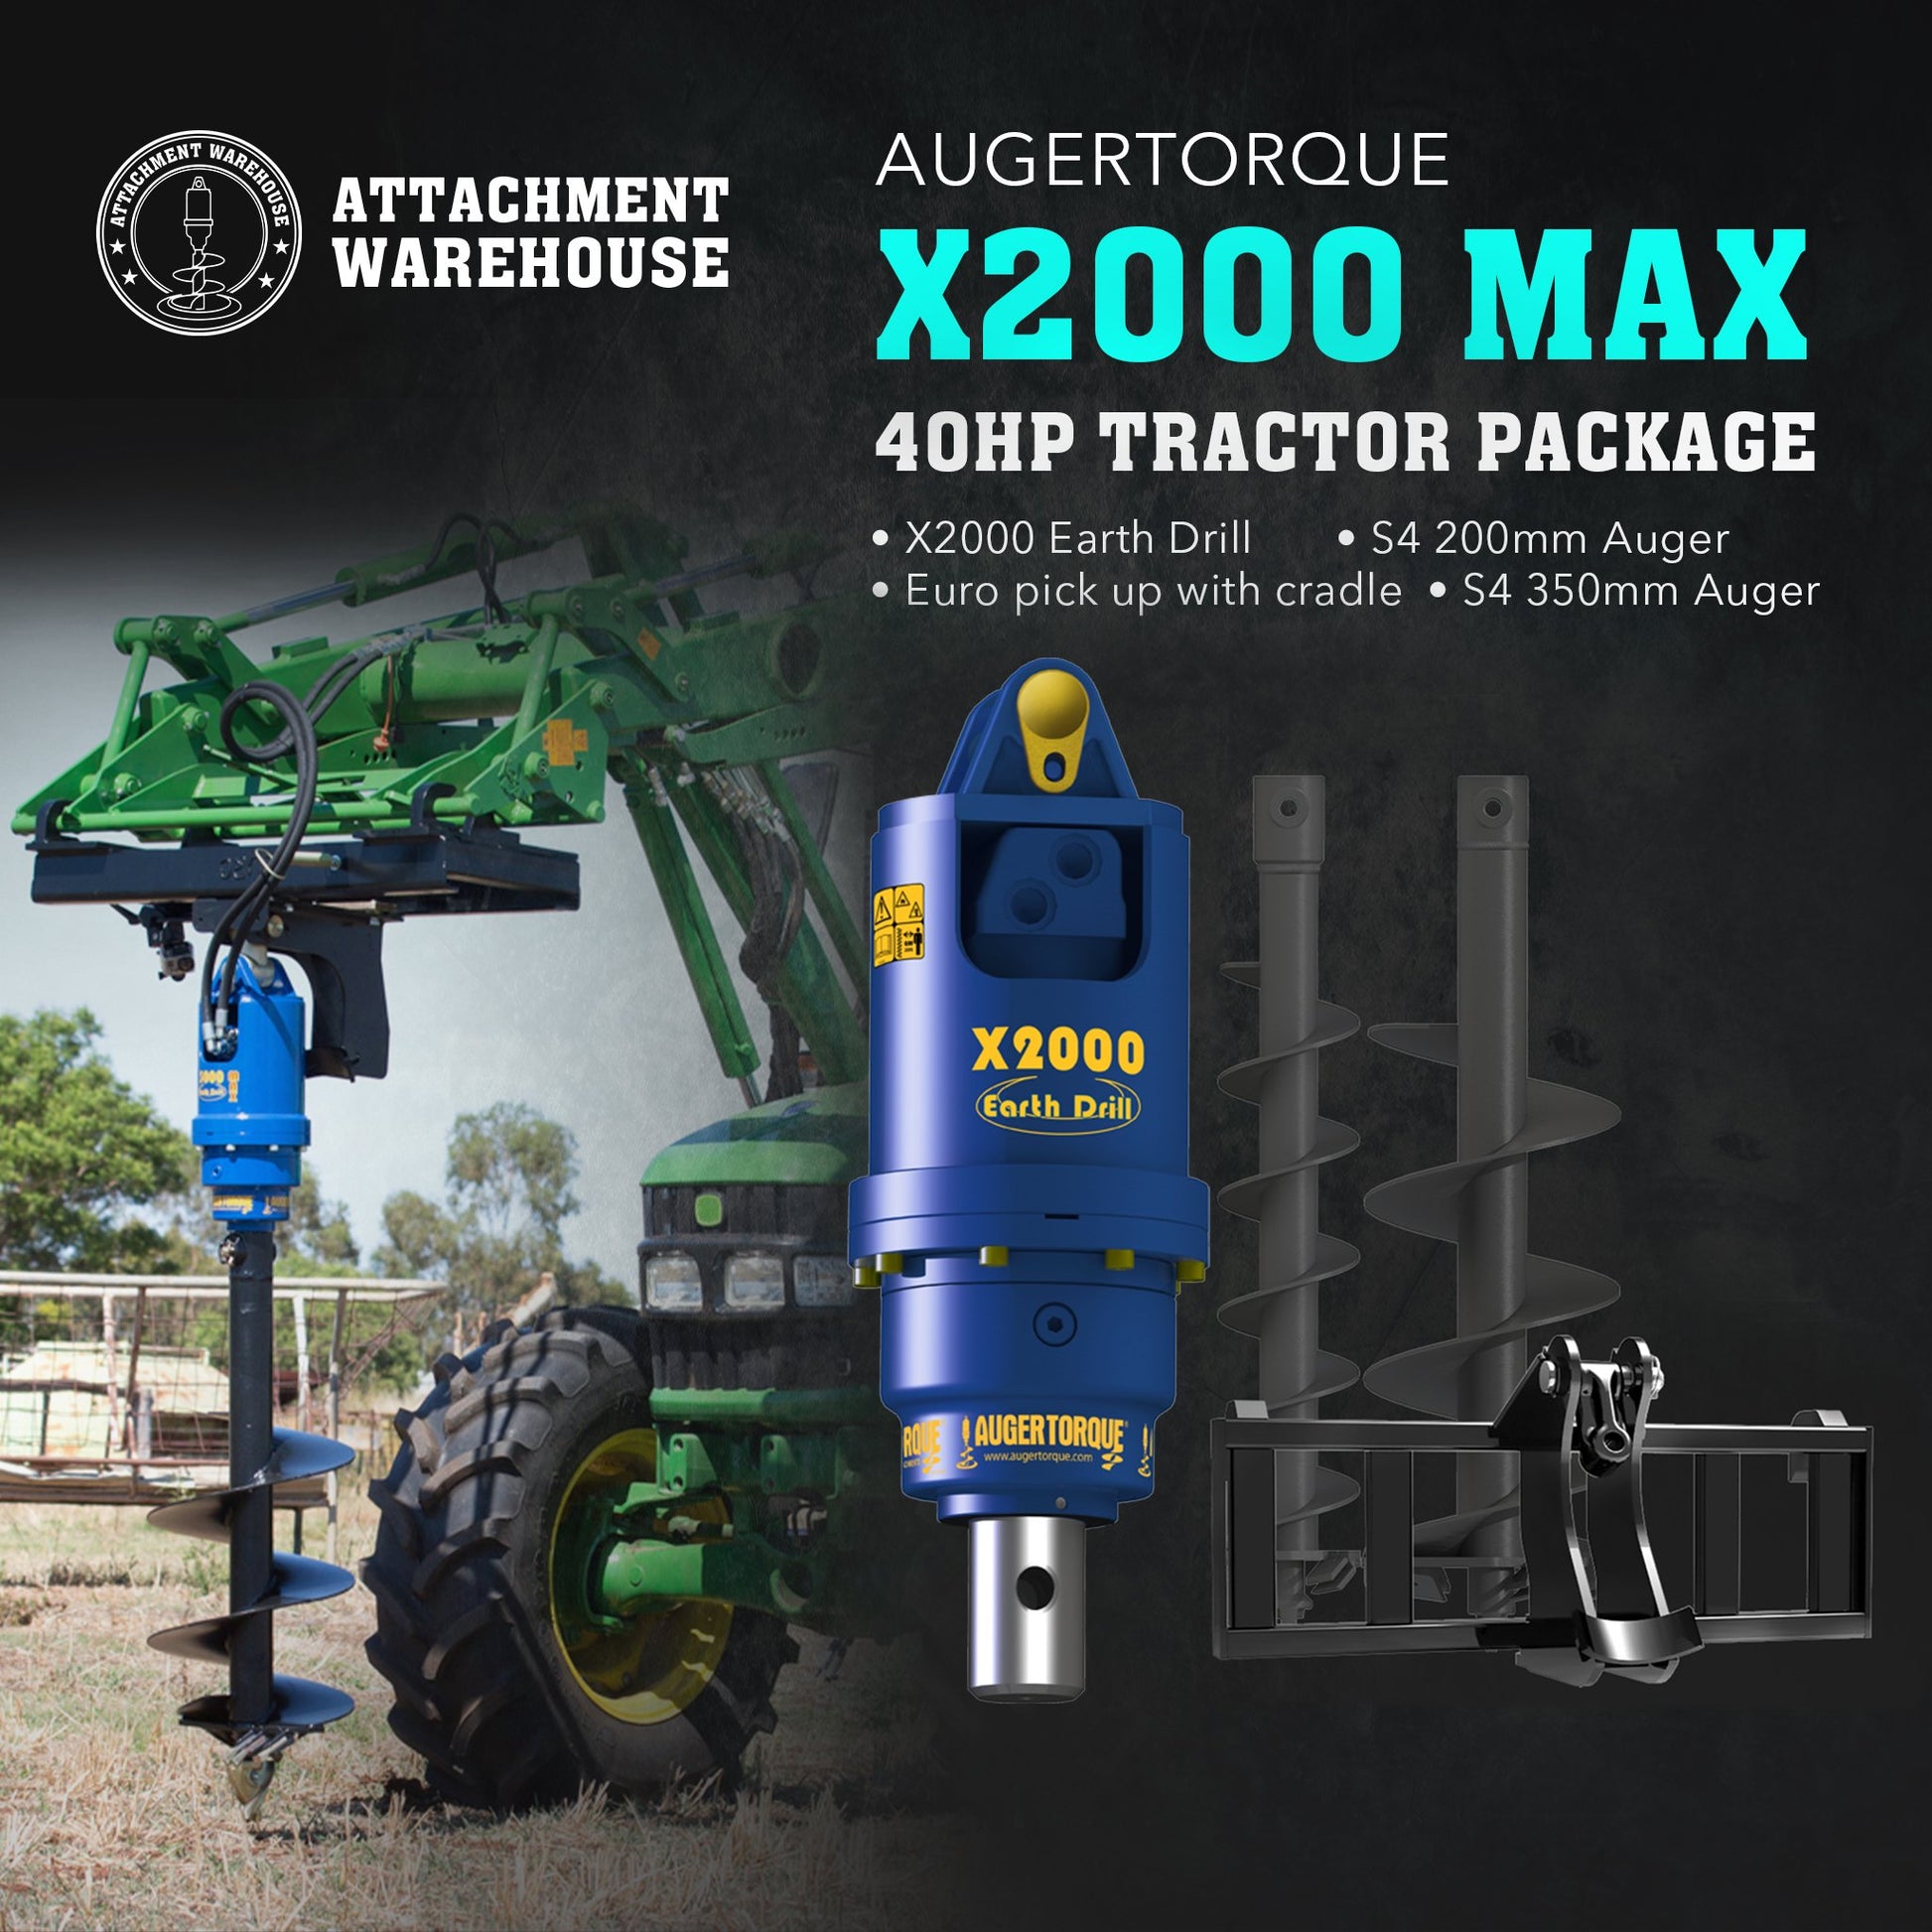 X2000 Max - 40HP Tractor Package - Attachment Warehouse